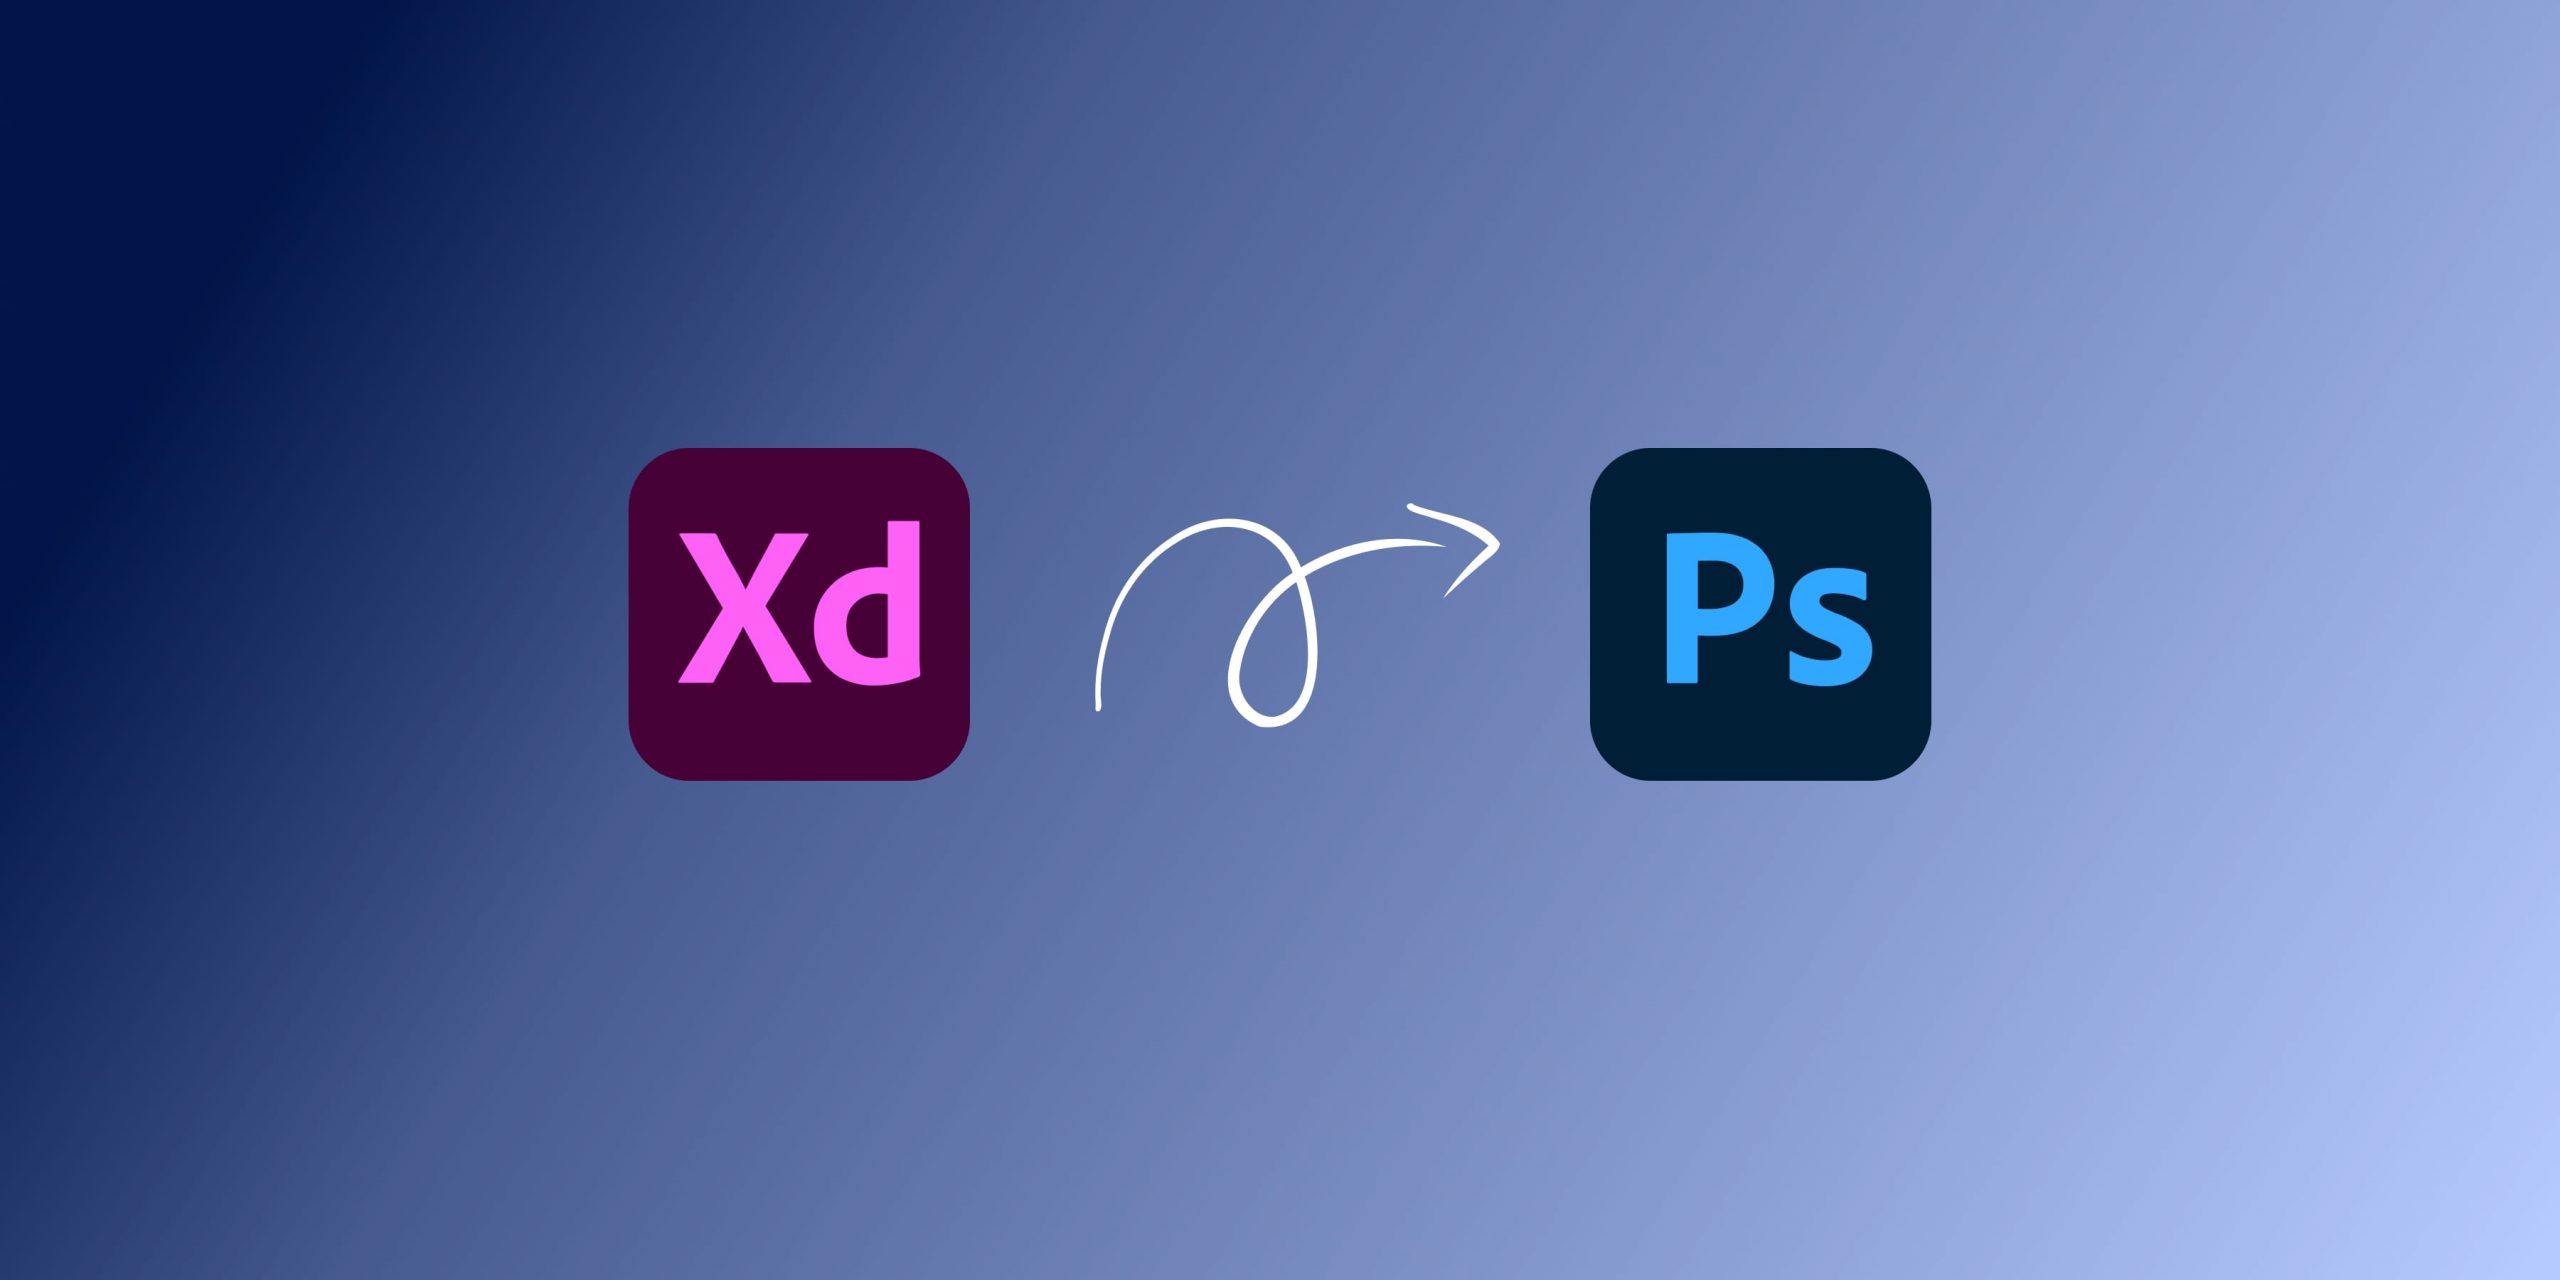 How to Open XD Files in Photoshop: What options are there?